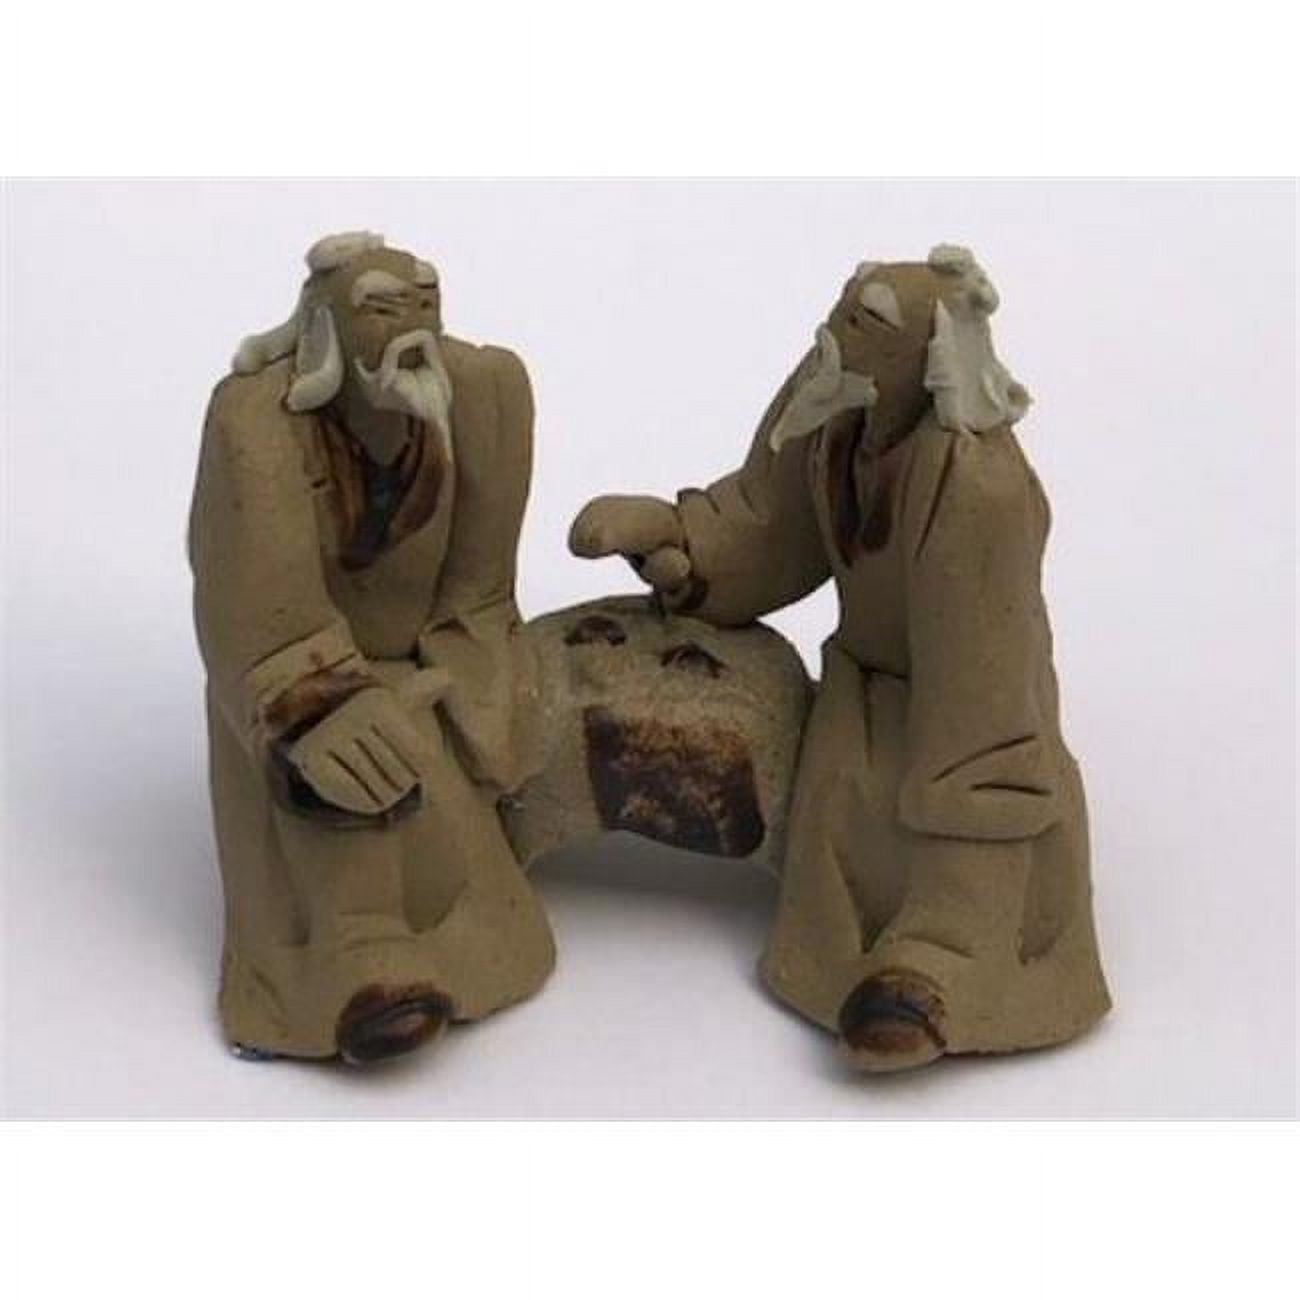 Picture of Bonsai Boy of New York e3511 2 in. Two Mud Men Sitting on a Bench Playing Chess Ceramic Figurine